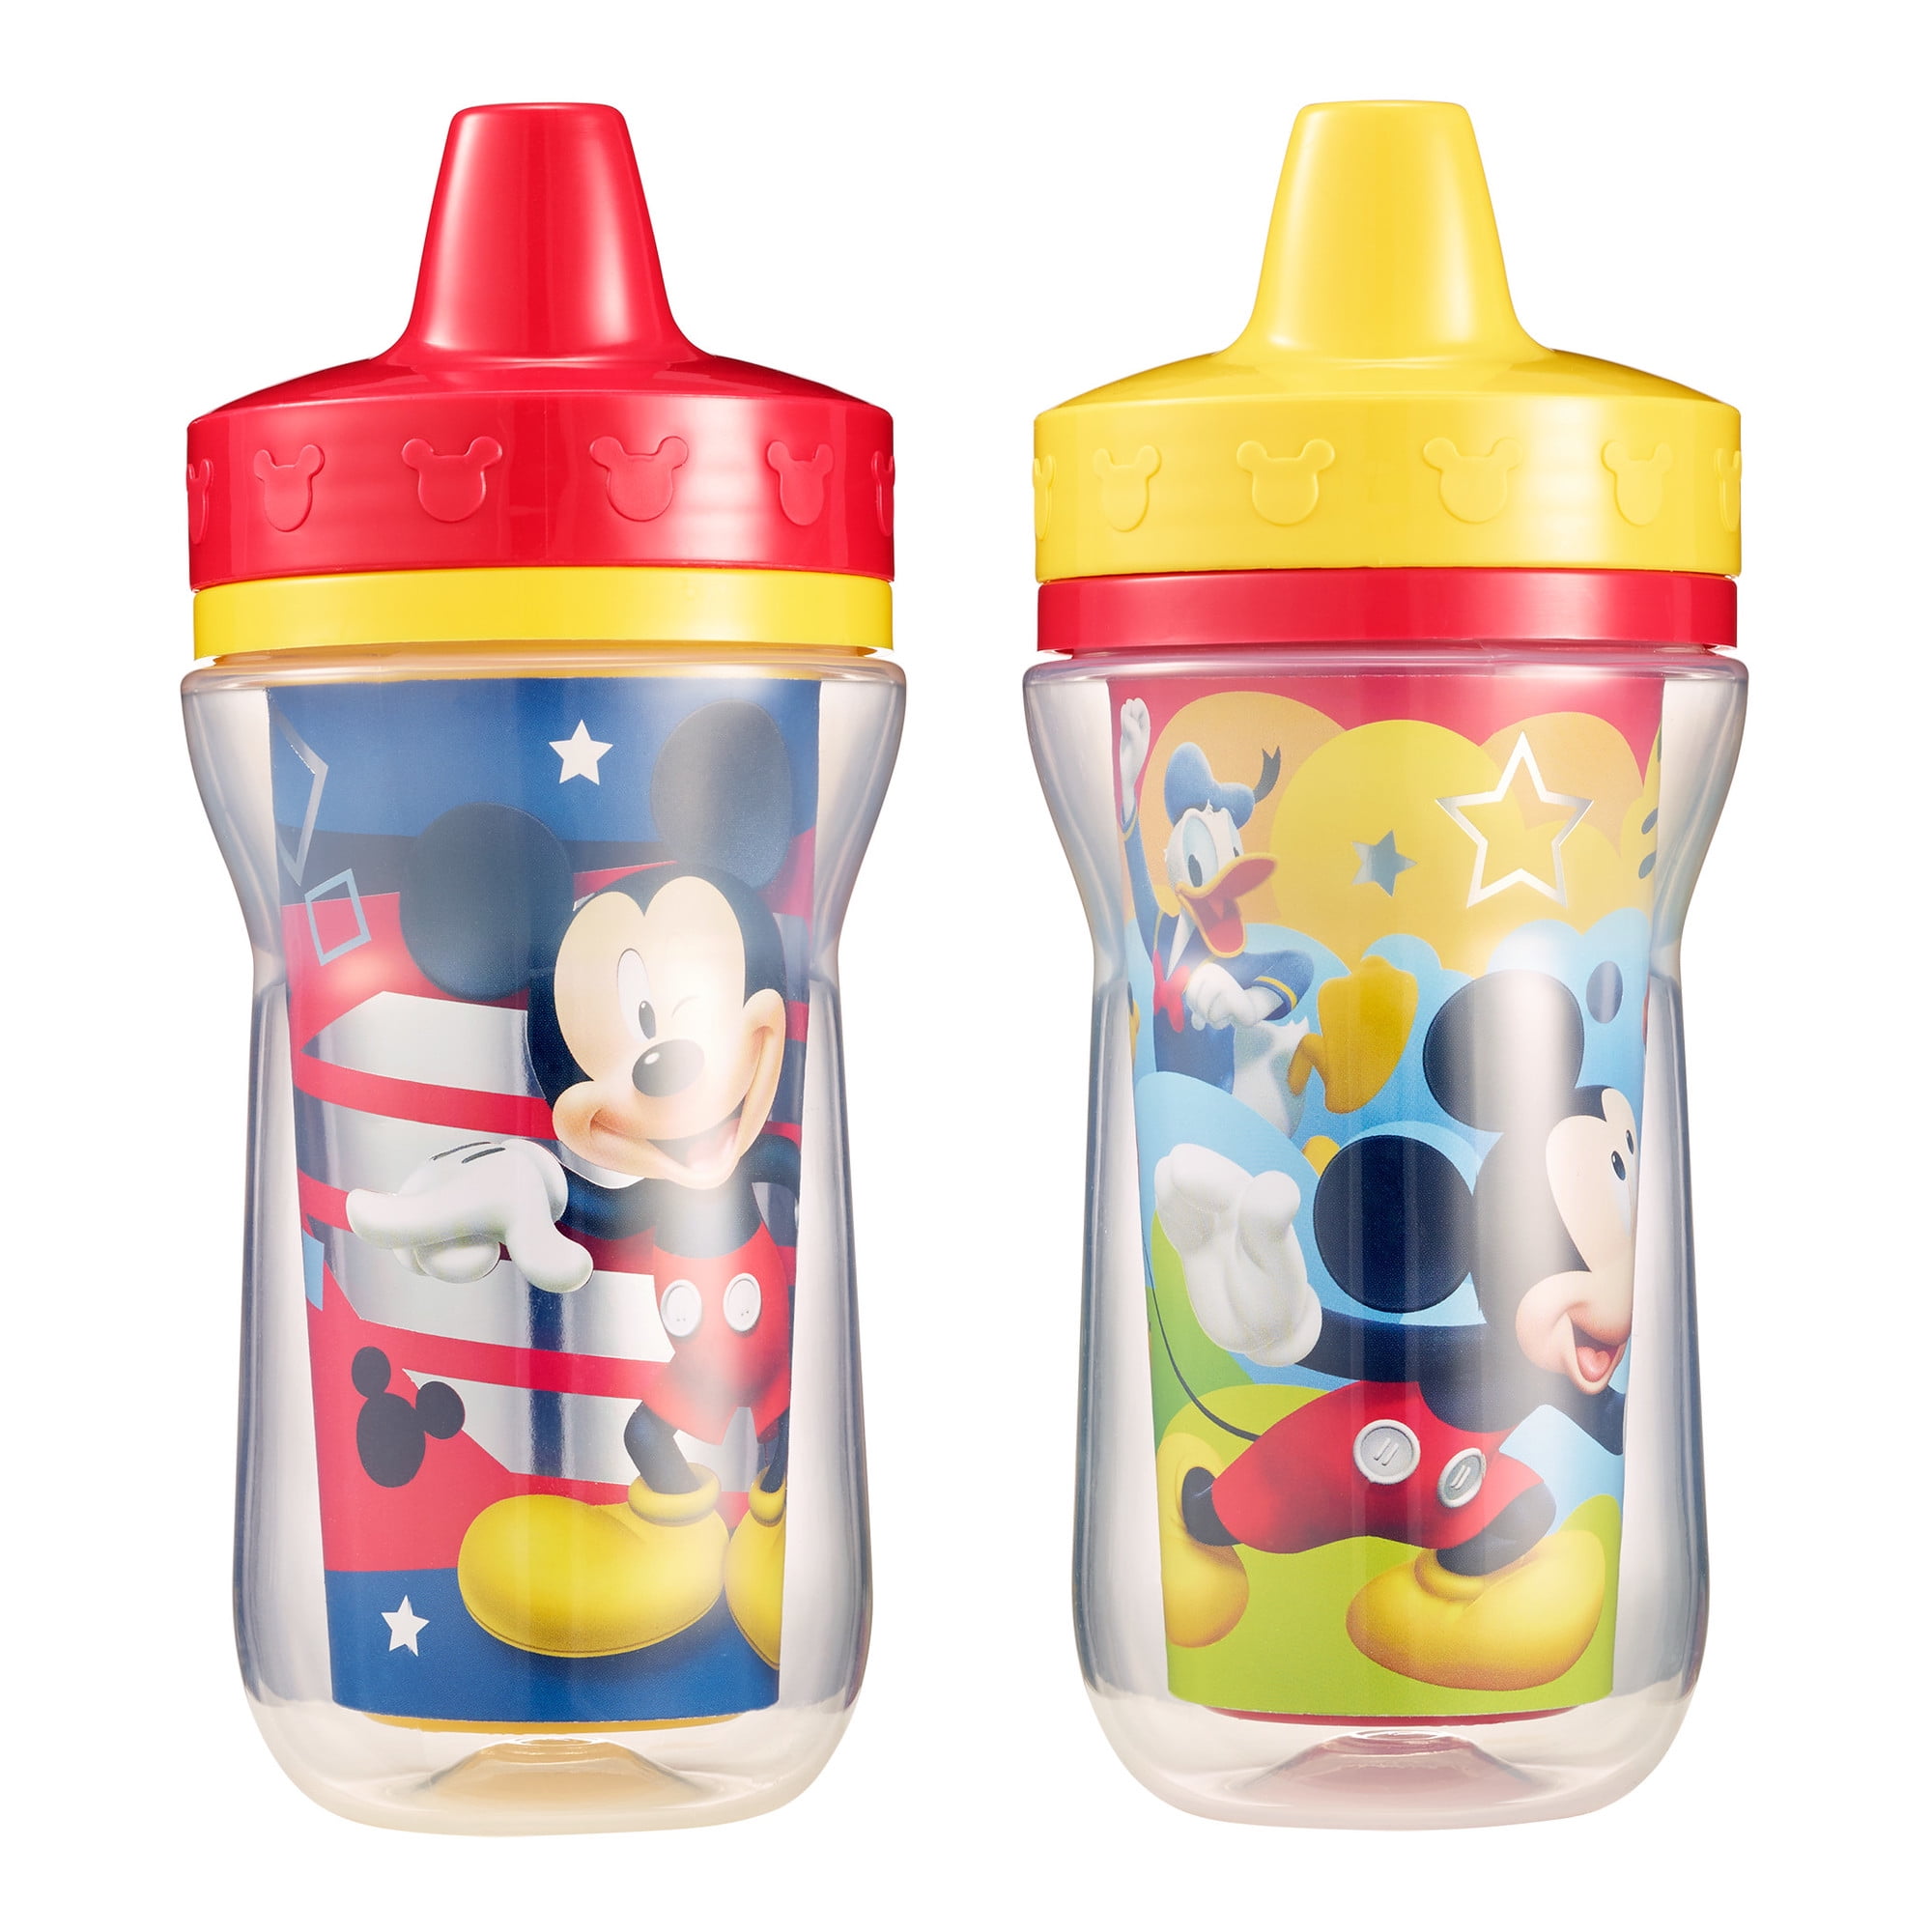 The First Years Disney Pixar Cars Insulated Sippy Cup 9 Oz